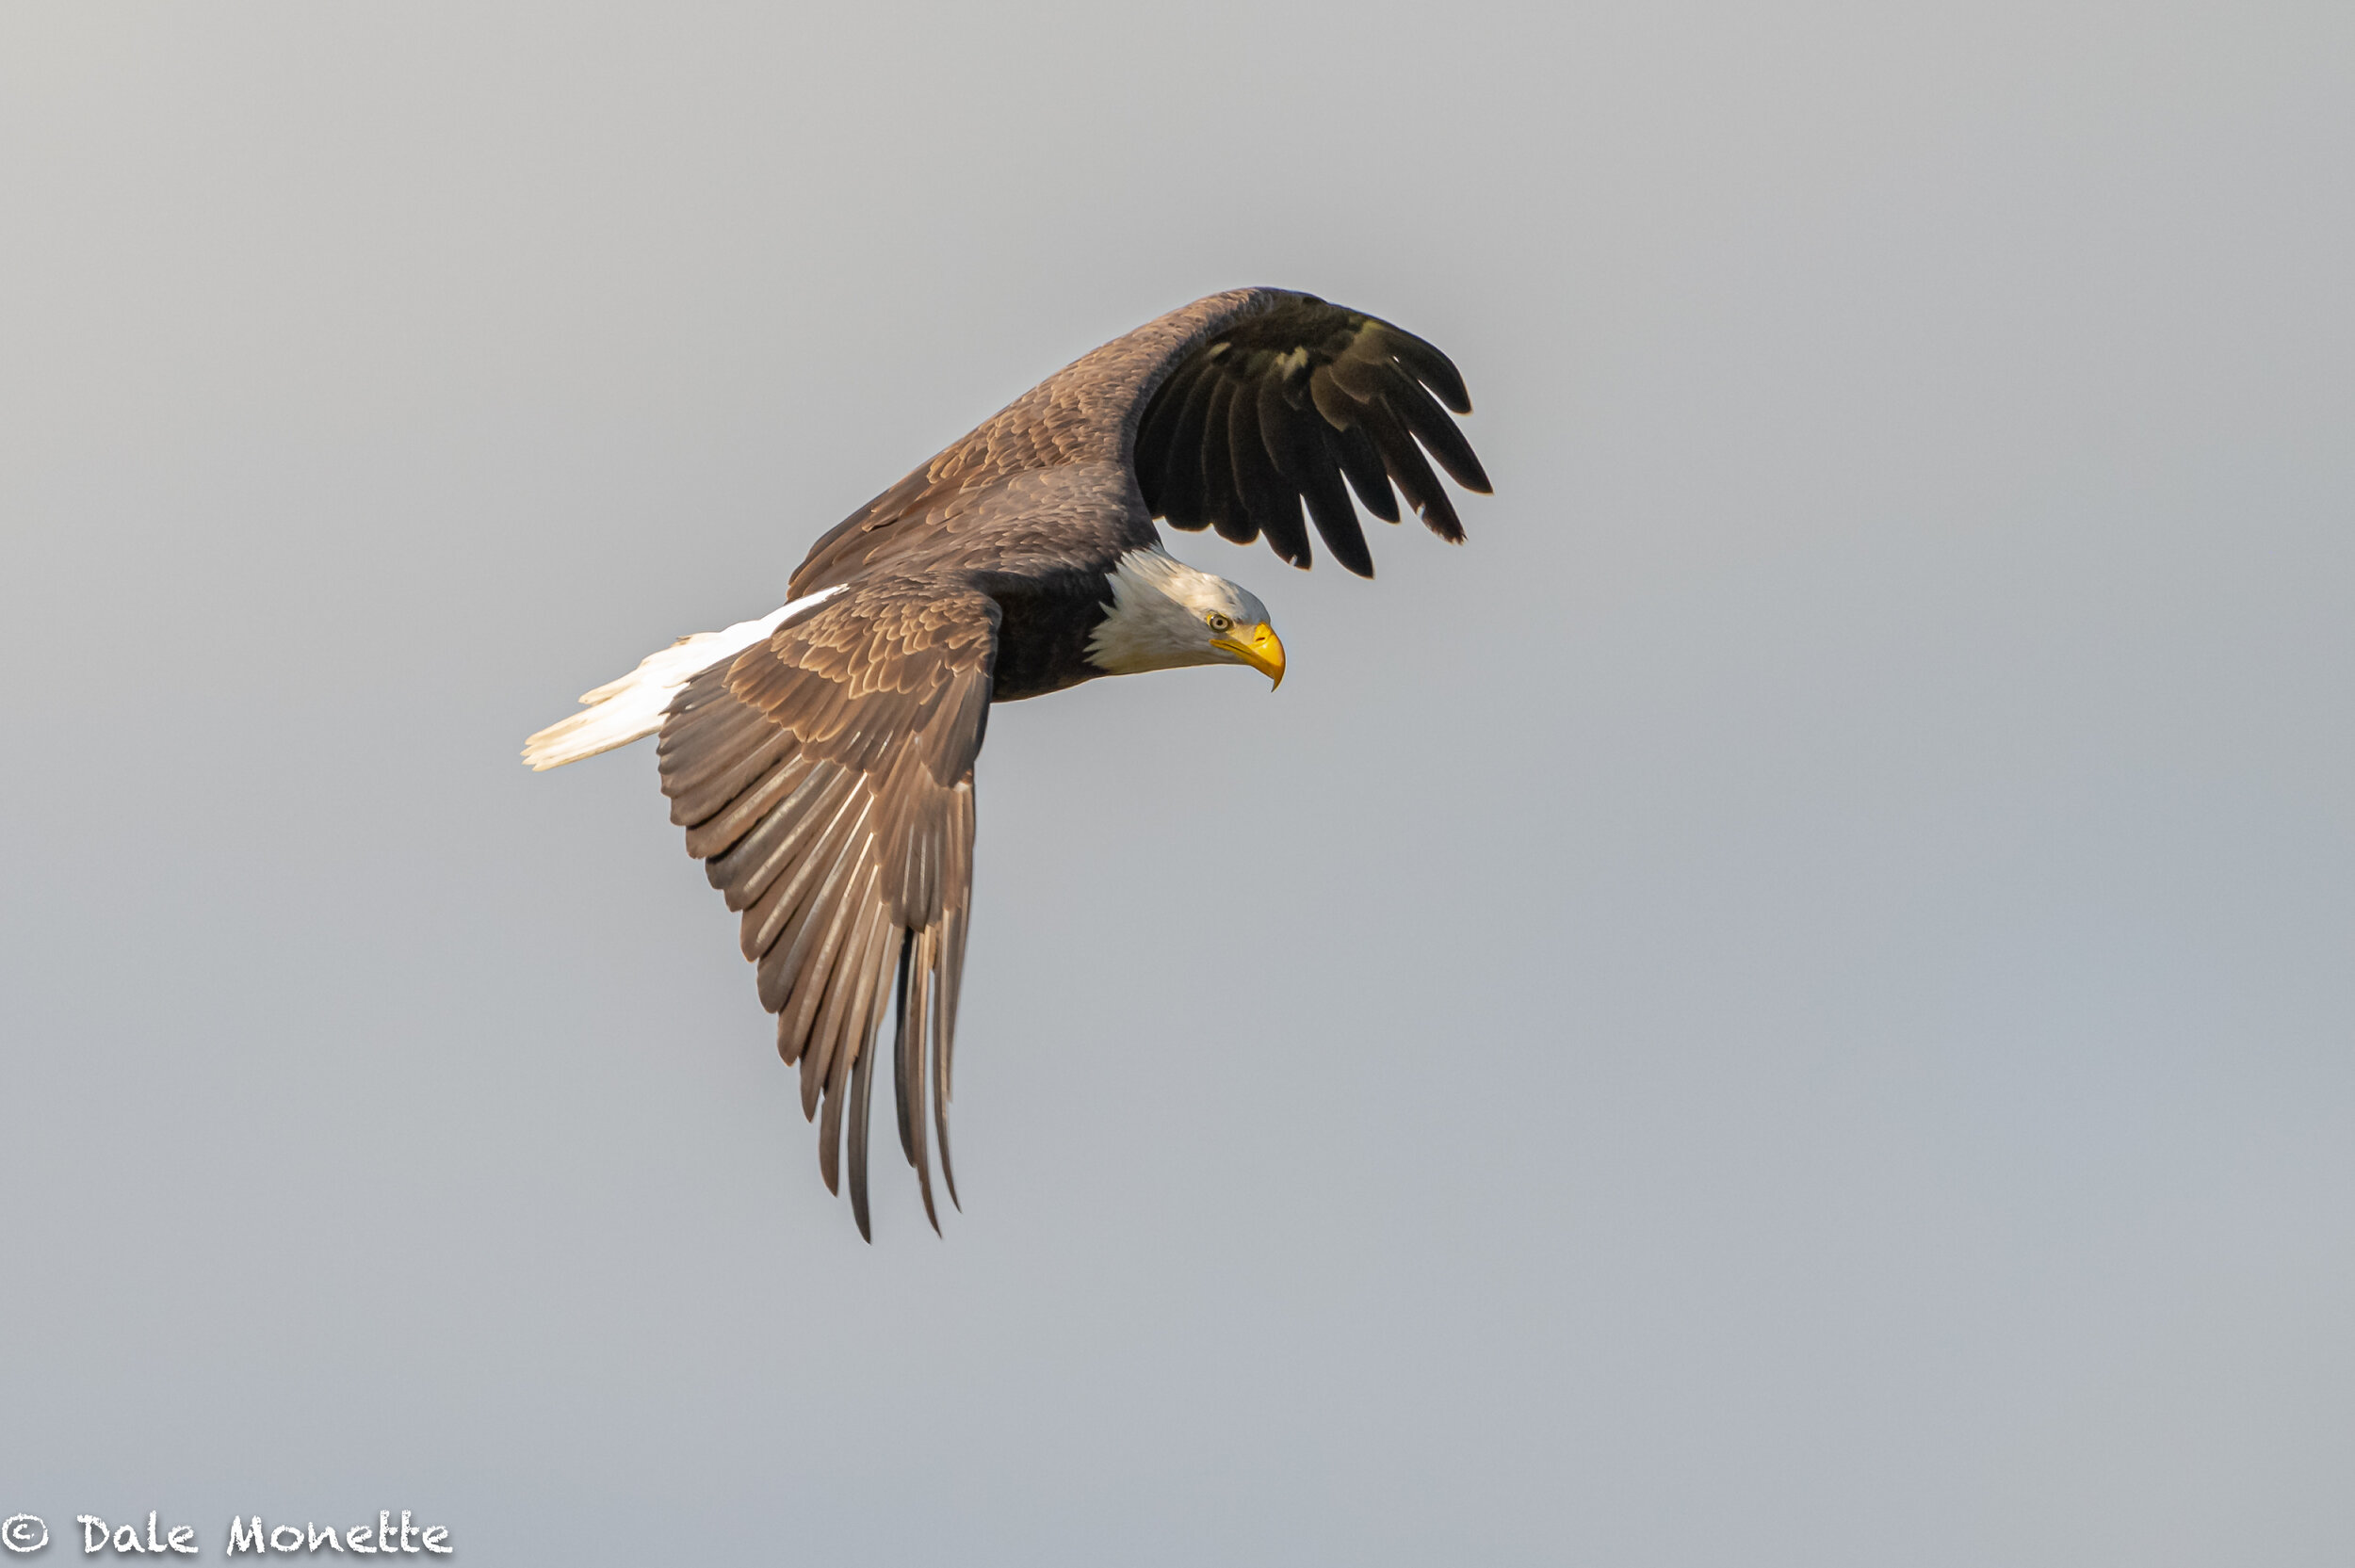   An adult bald eagle soaring over the empty power canal looking for a quick meal.  